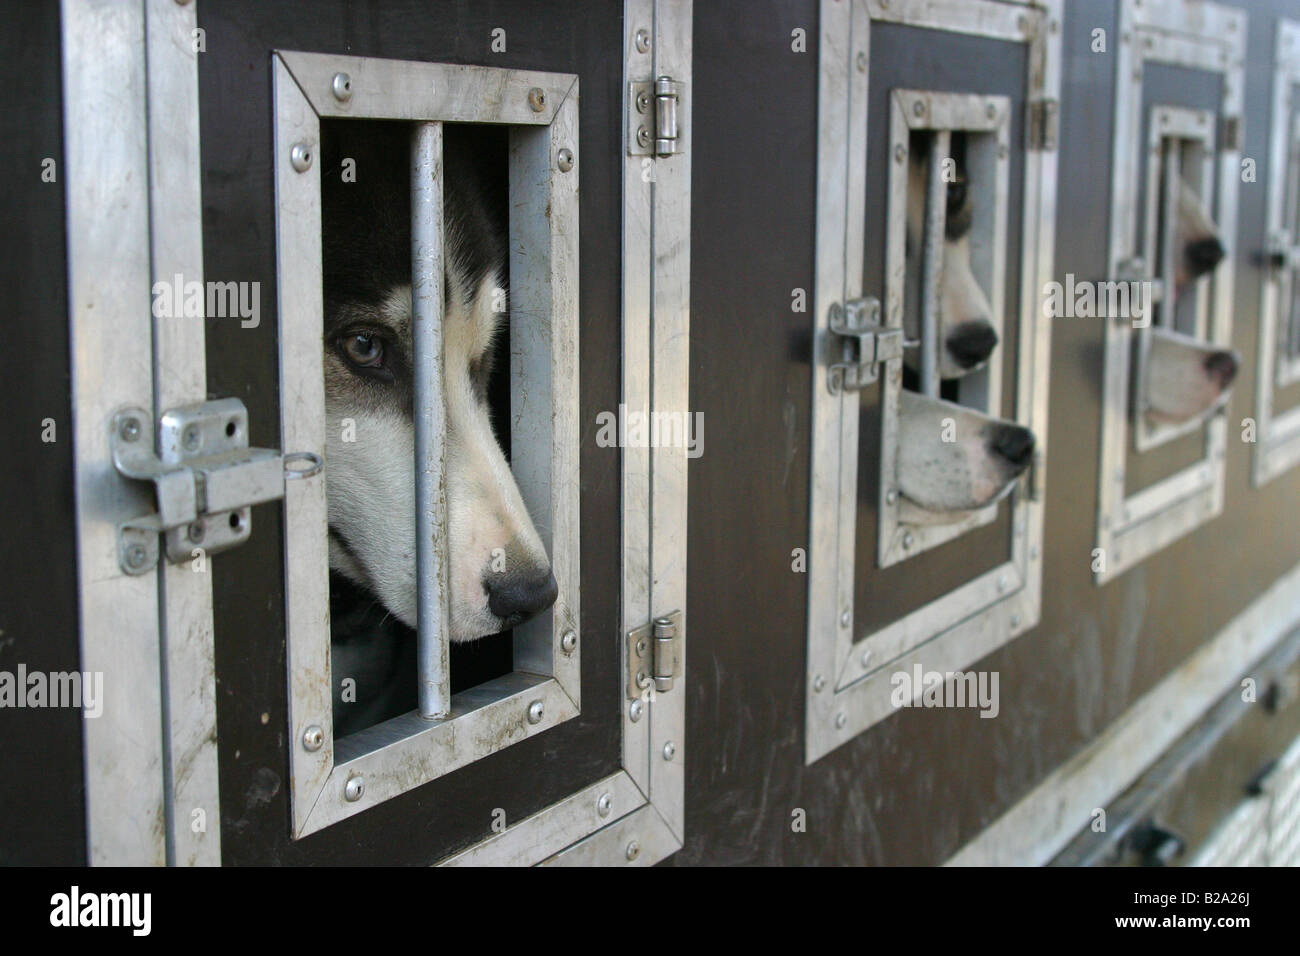 Husky dogs locked in transport cages Stock Photo - Alamy